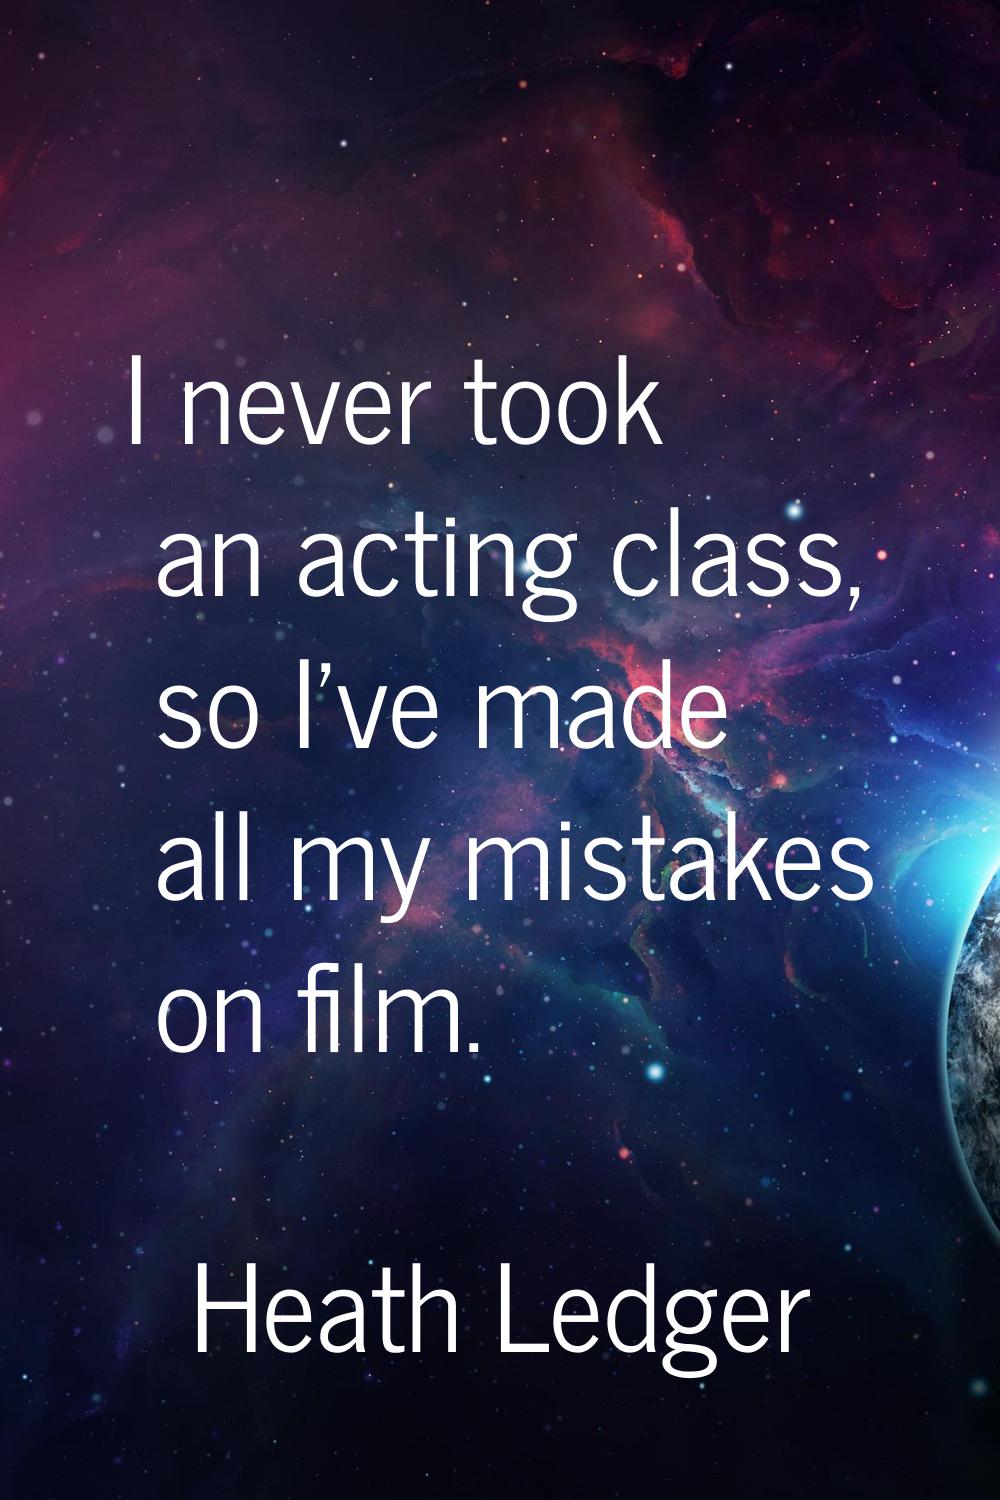 I never took an acting class, so I've made all my mistakes on film.